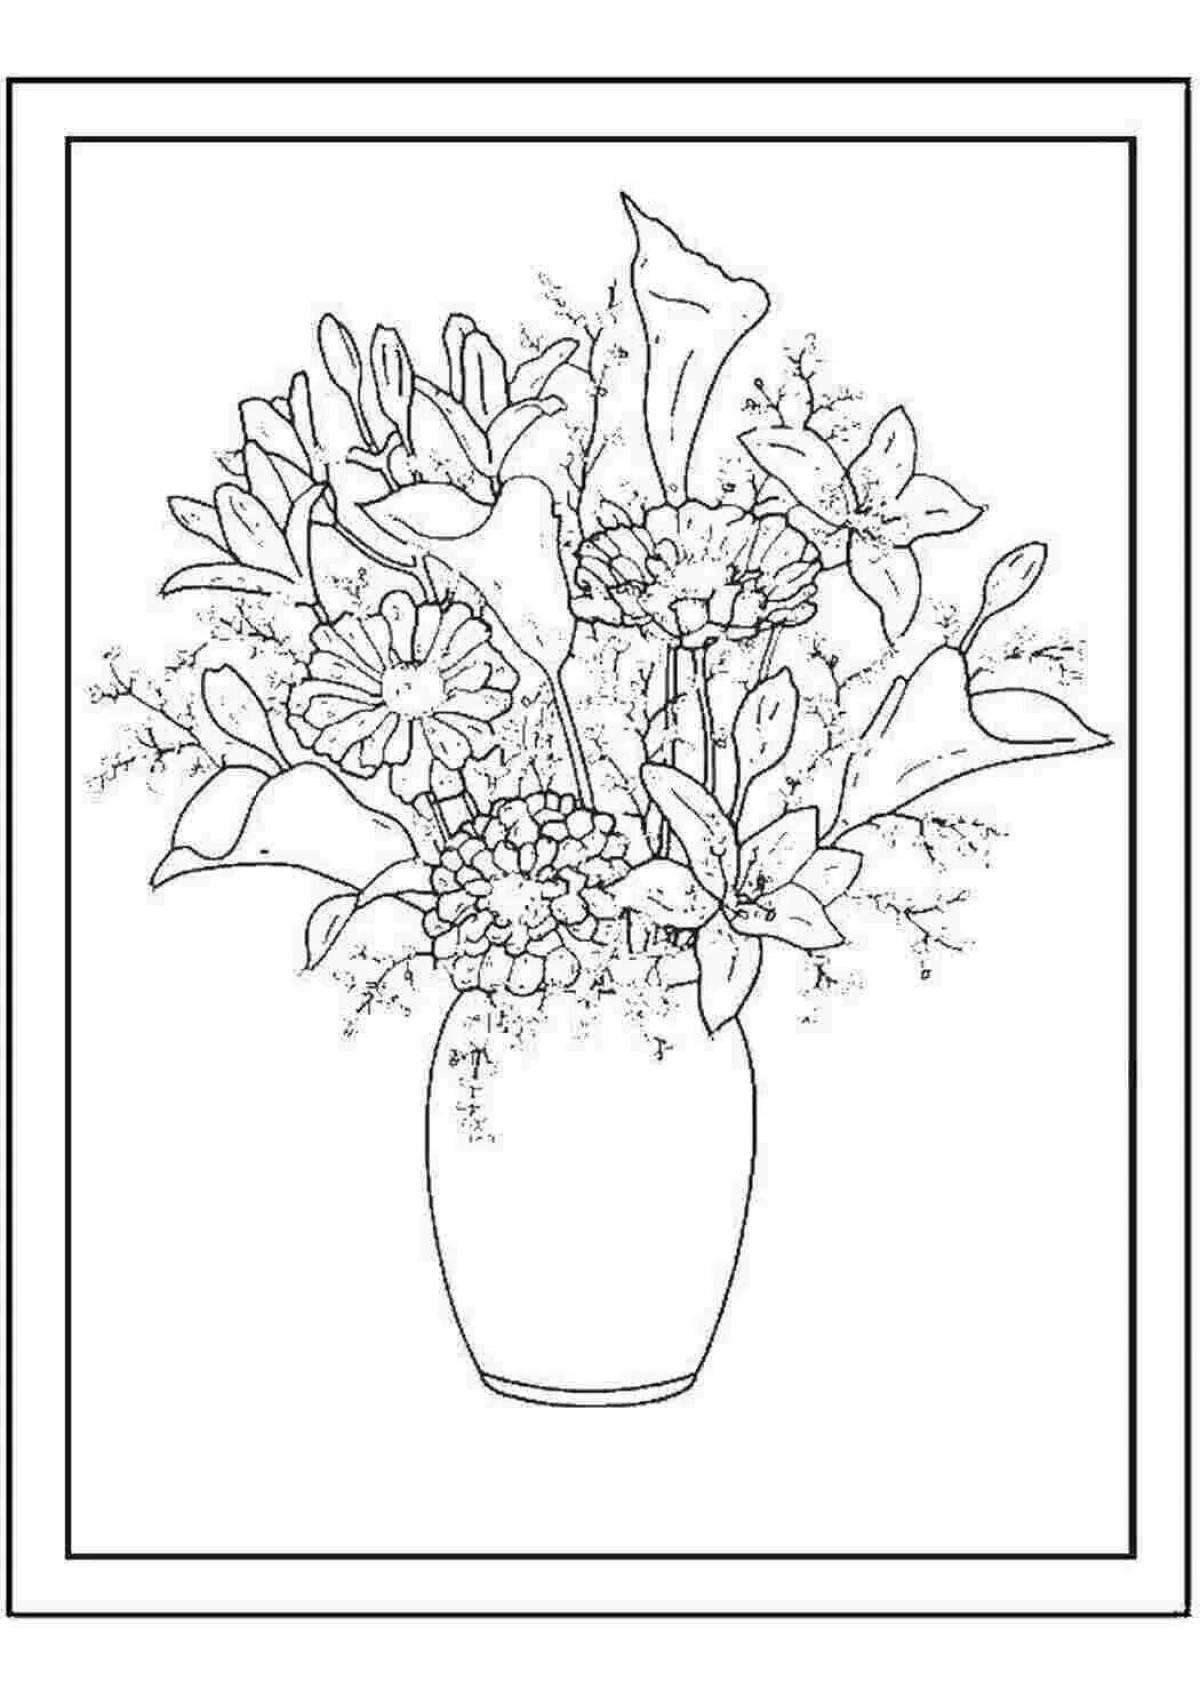 Joyful bouquet of flowers in a vase coloring book